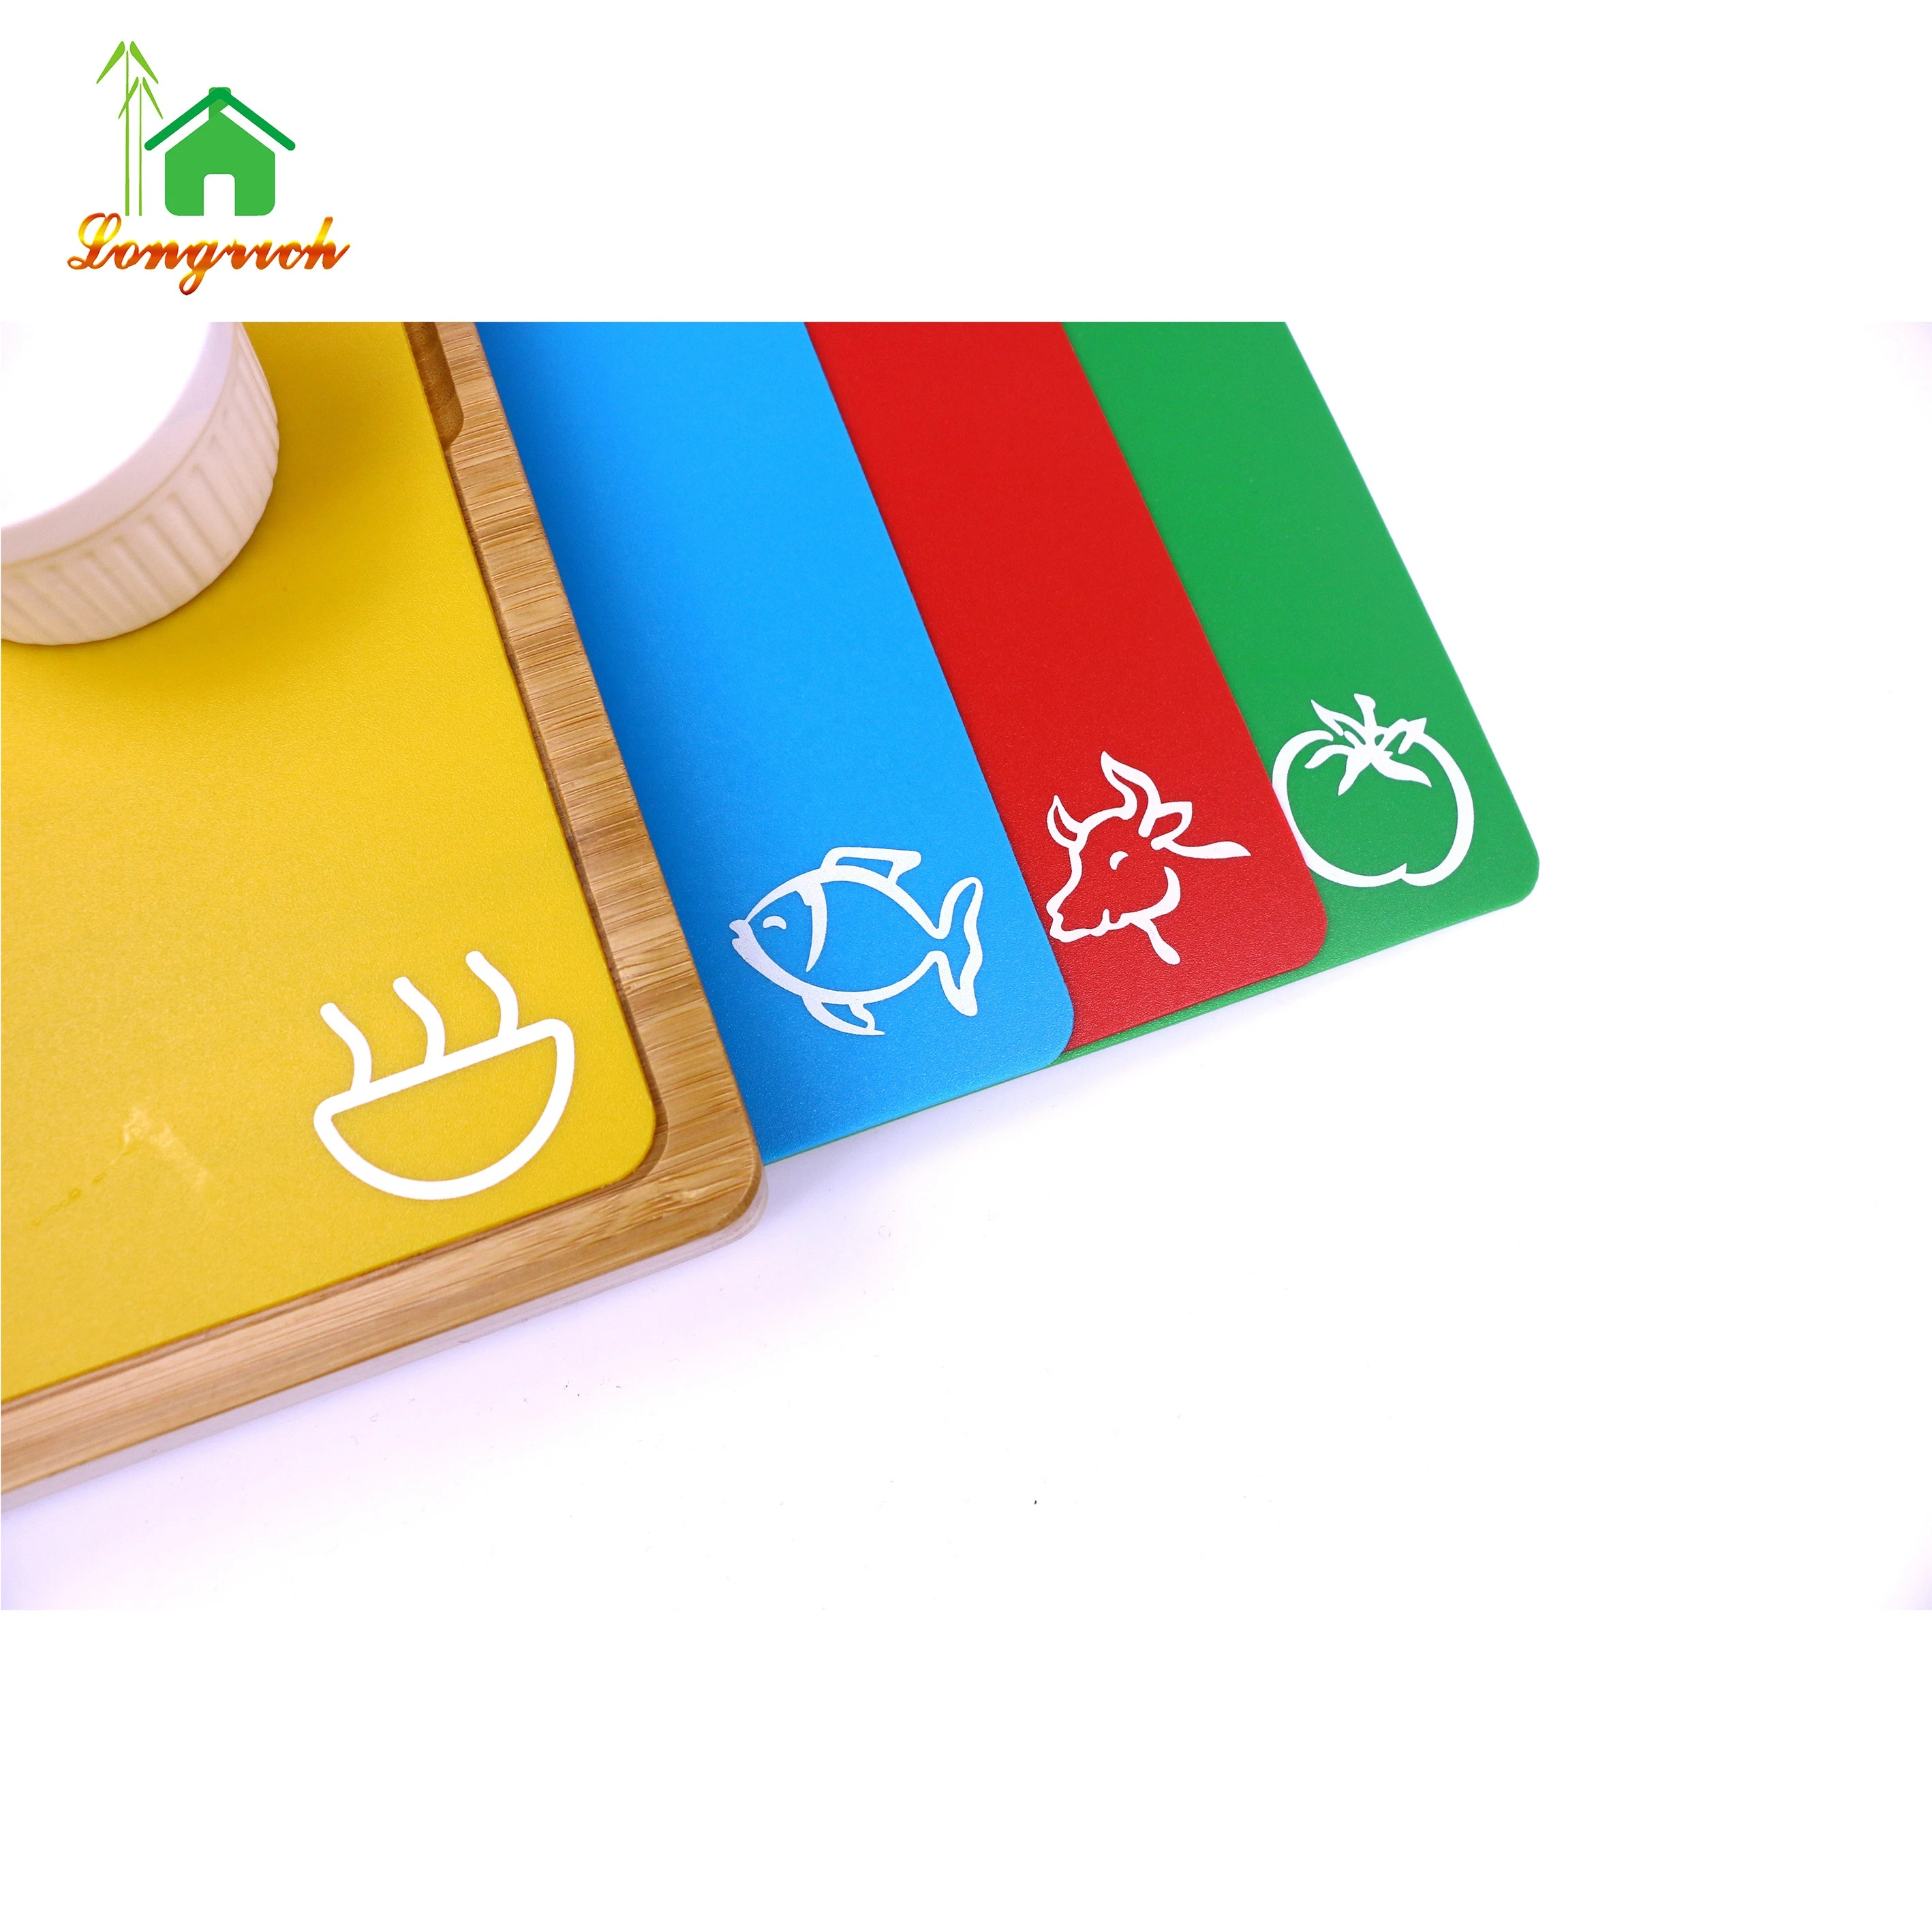 Wholesale Bamboo Wooden Cutting Chopping Board with Color-Coded Cutting Mats and Handles